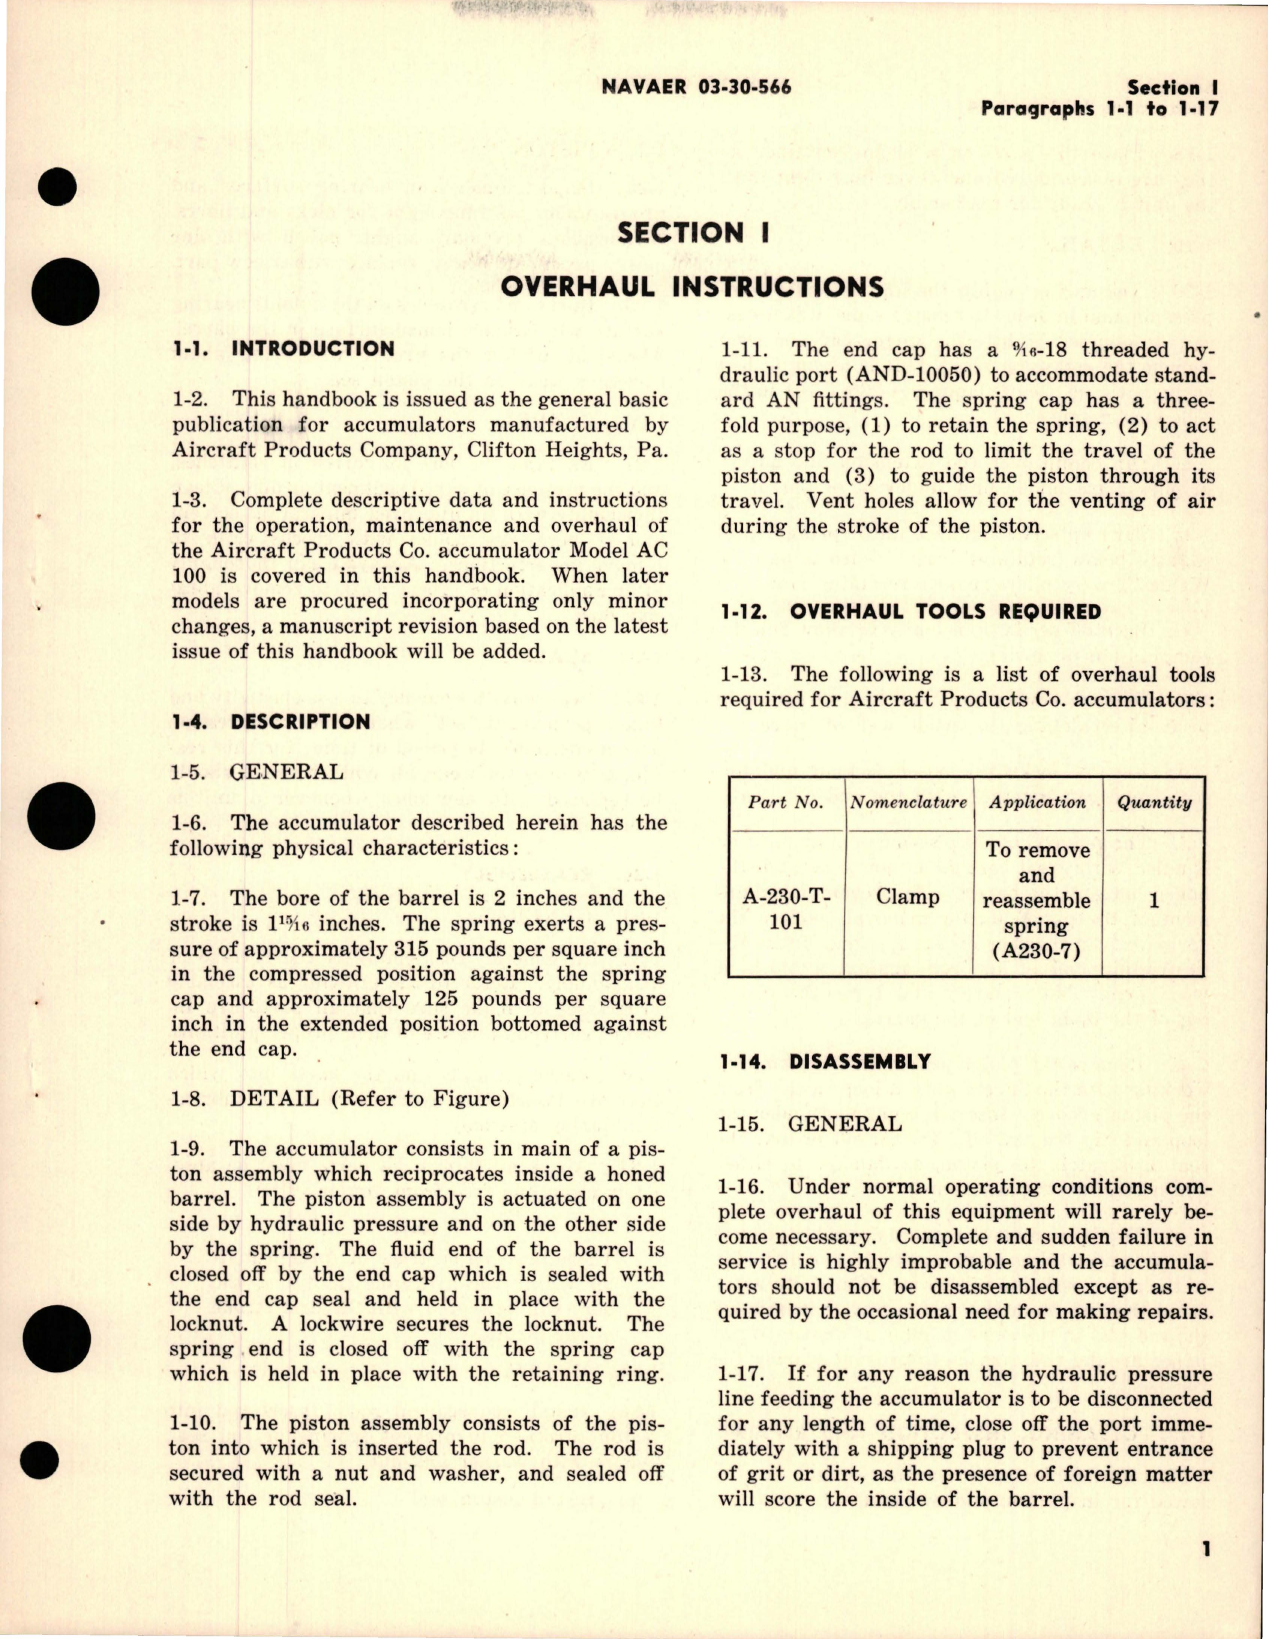 Sample page 5 from AirCorps Library document: Overhaul Instructions with Parts Catalog for Accumulator - PartAC100